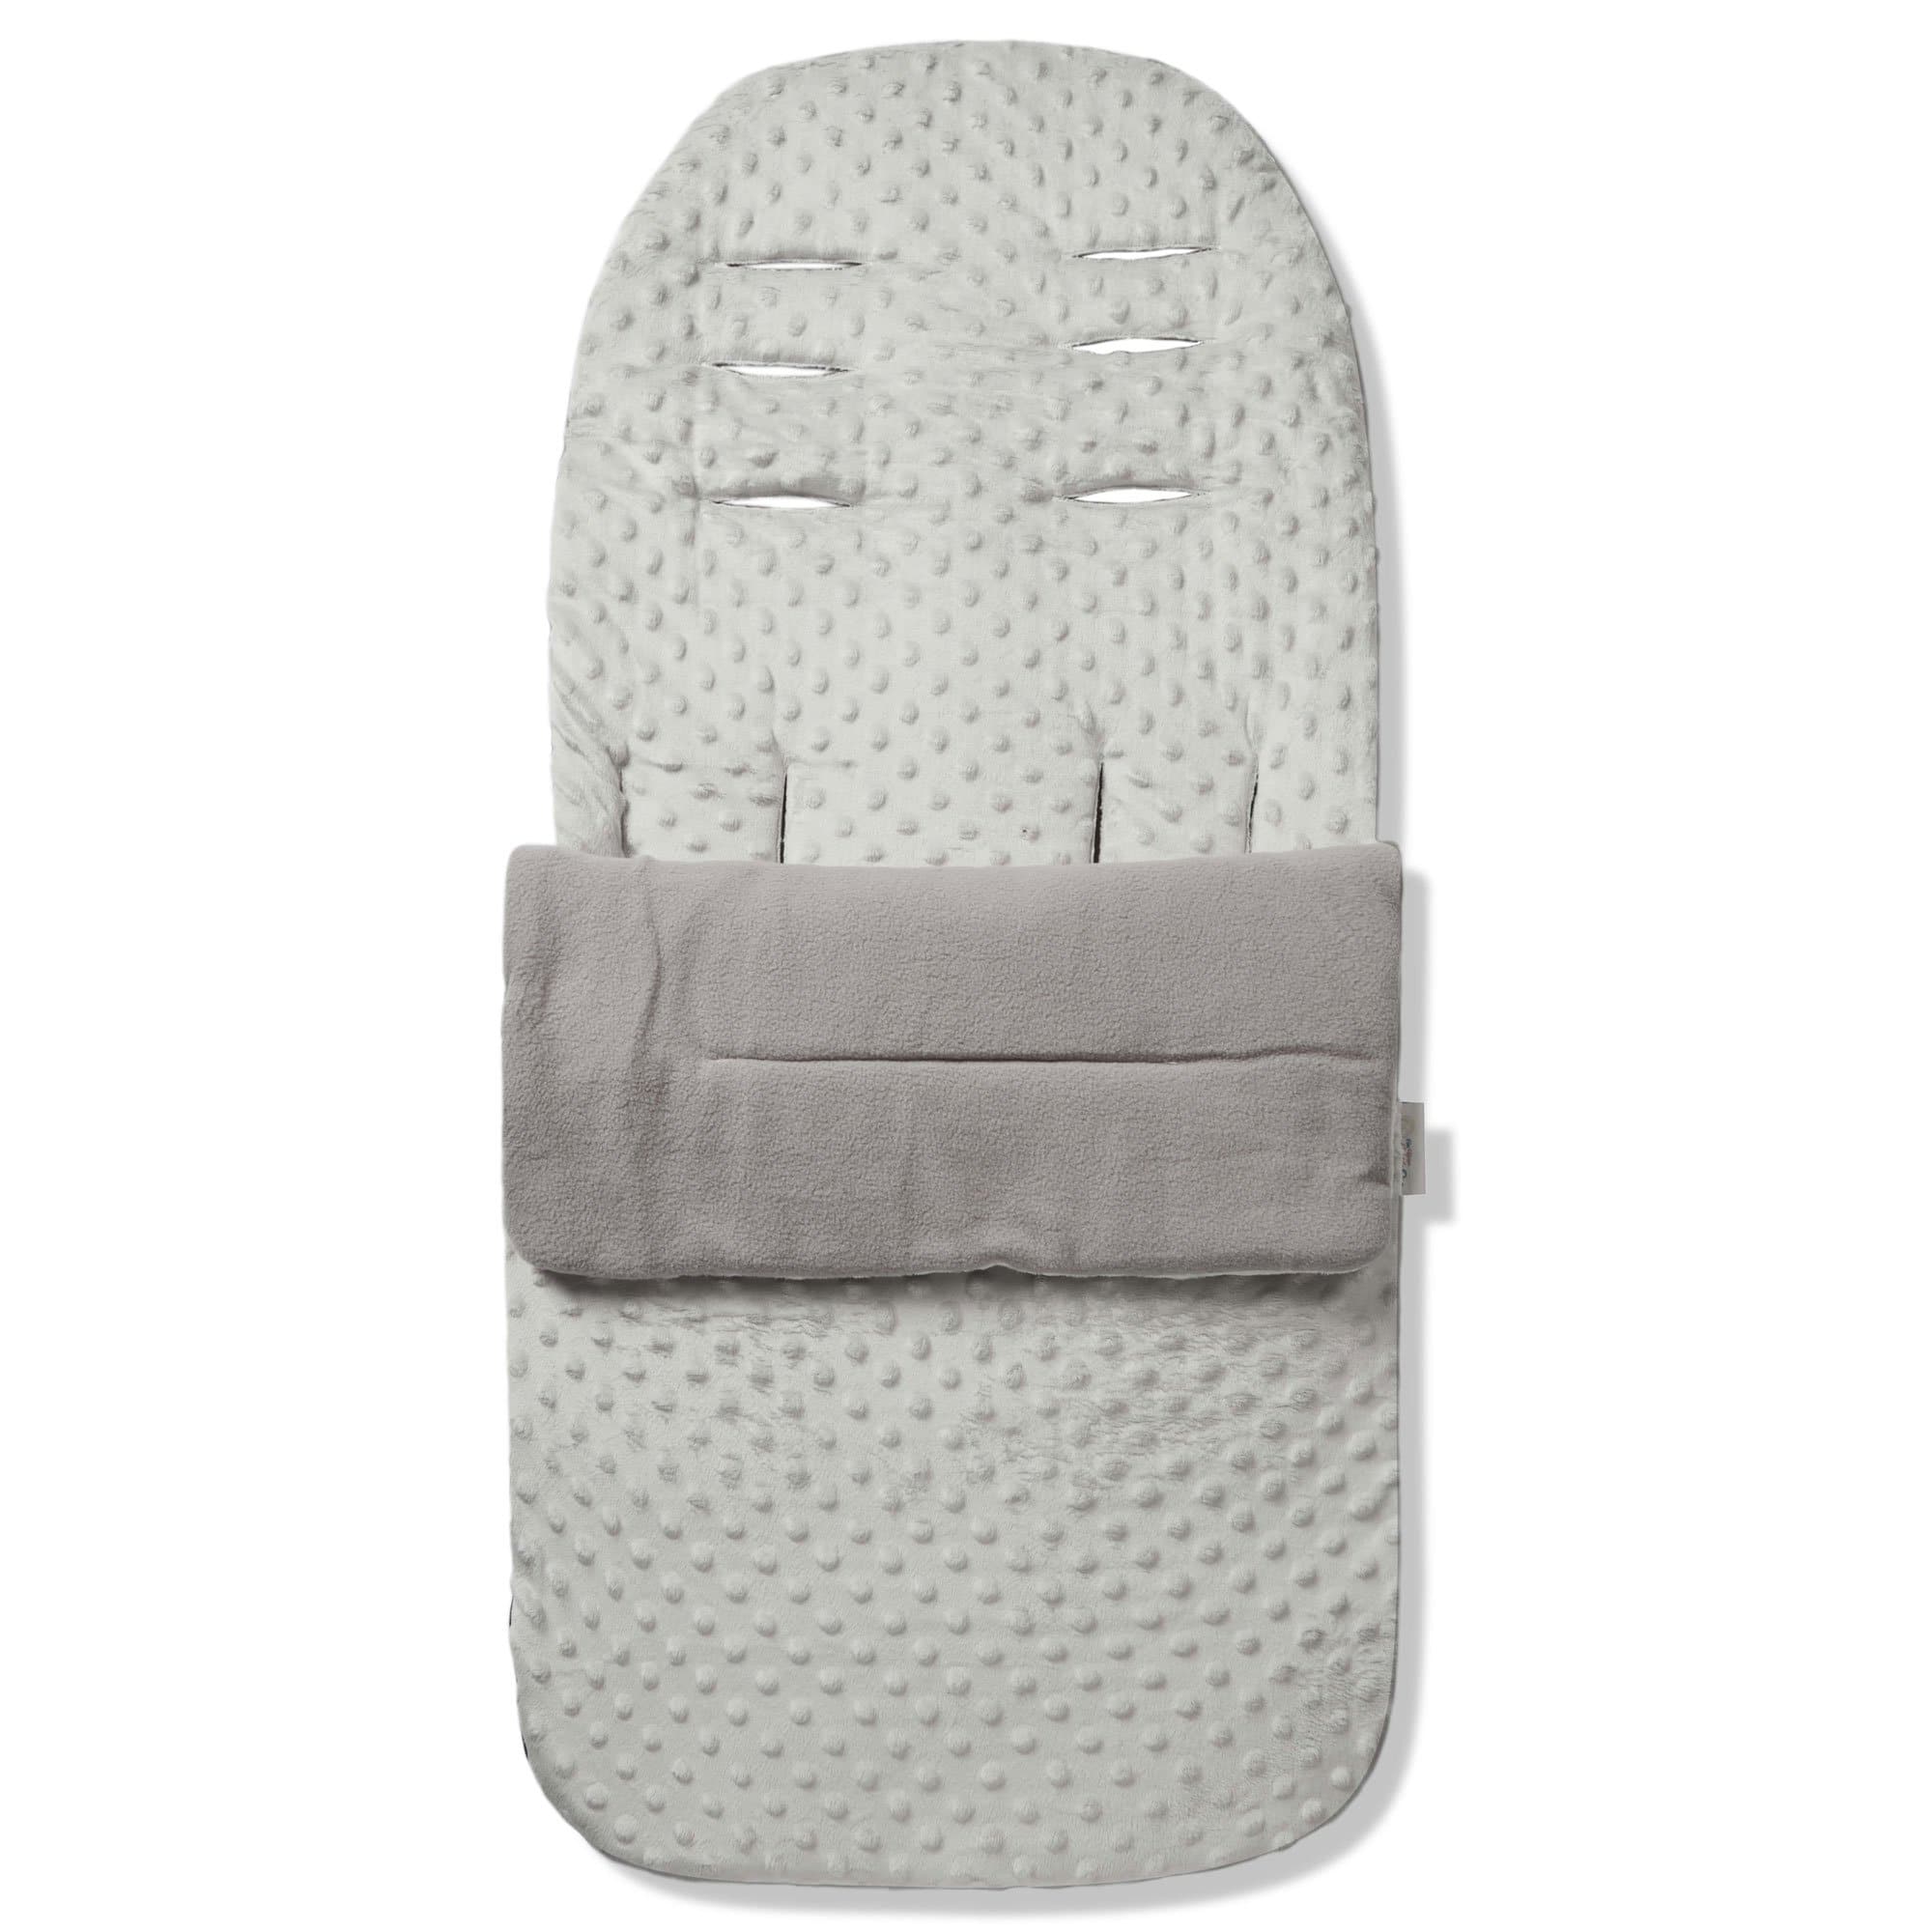 Dimple Footmuff / Cosy Toes Compatible with Baby Jogger - For Your Little One